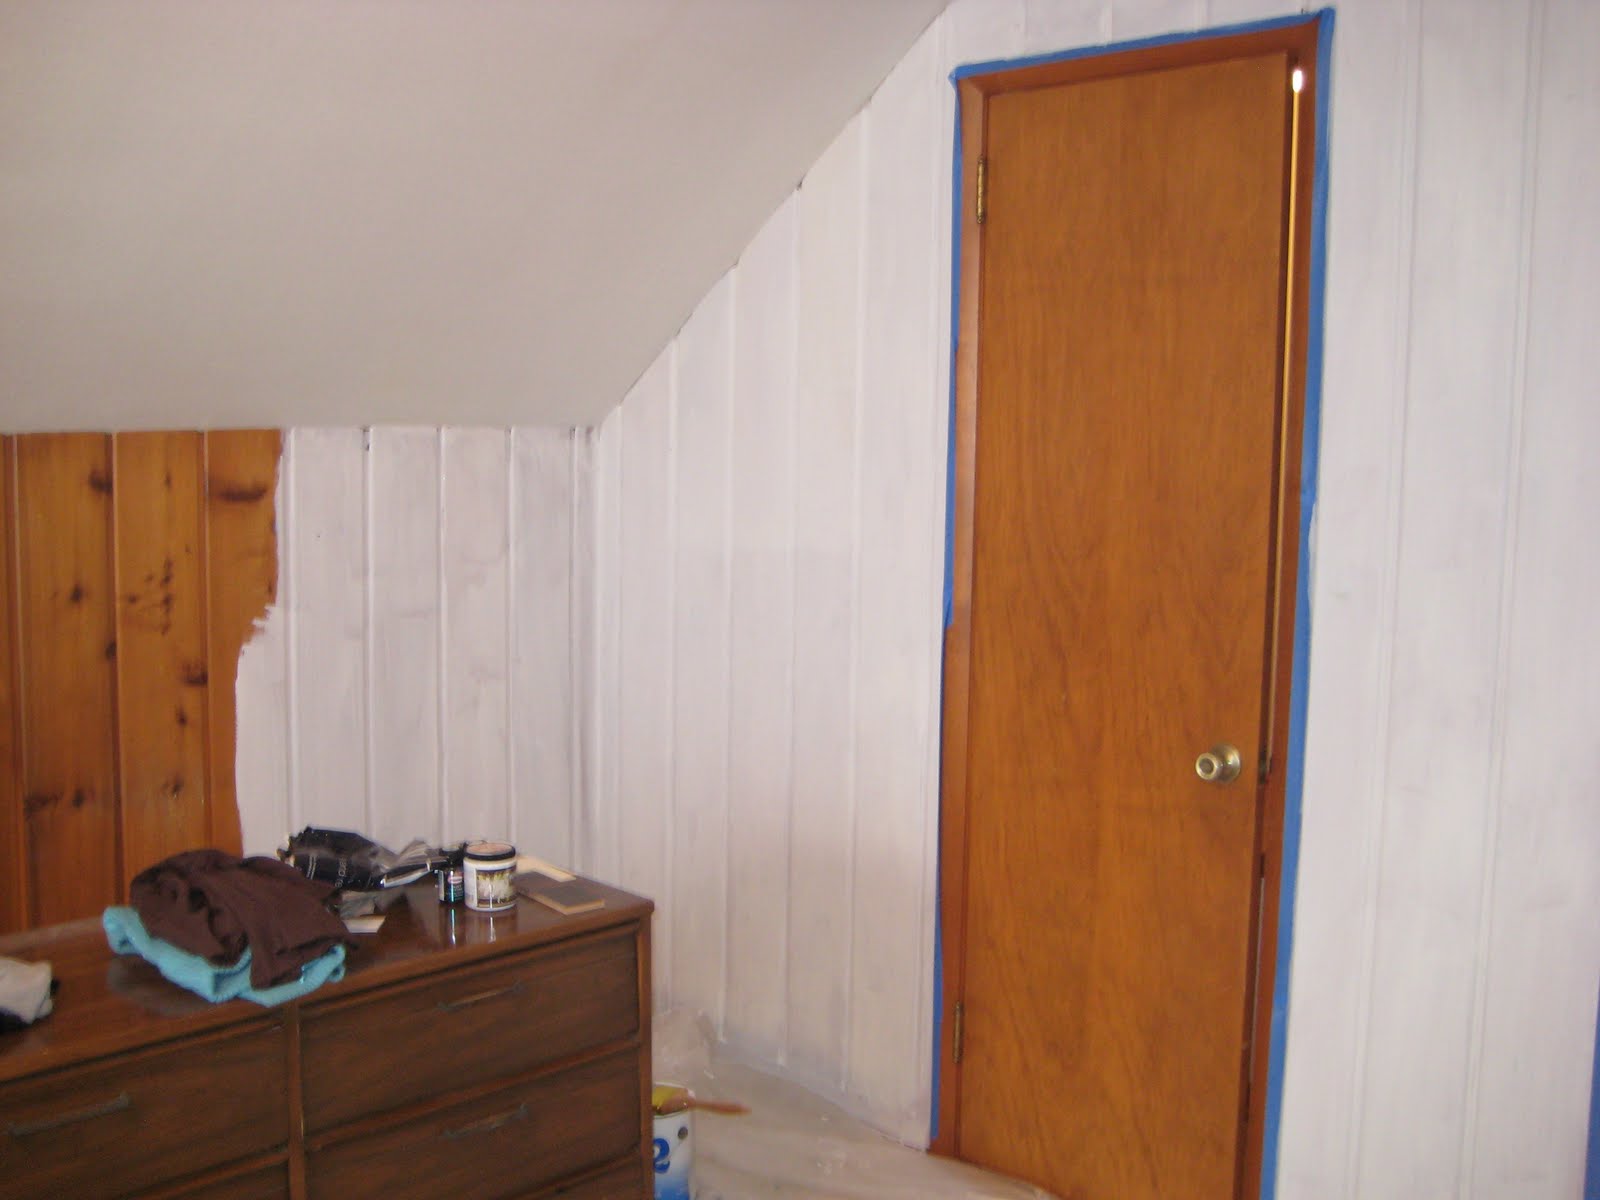 Painting Over Knotty Pine Paneling Plete Master Bedroom Redo HD